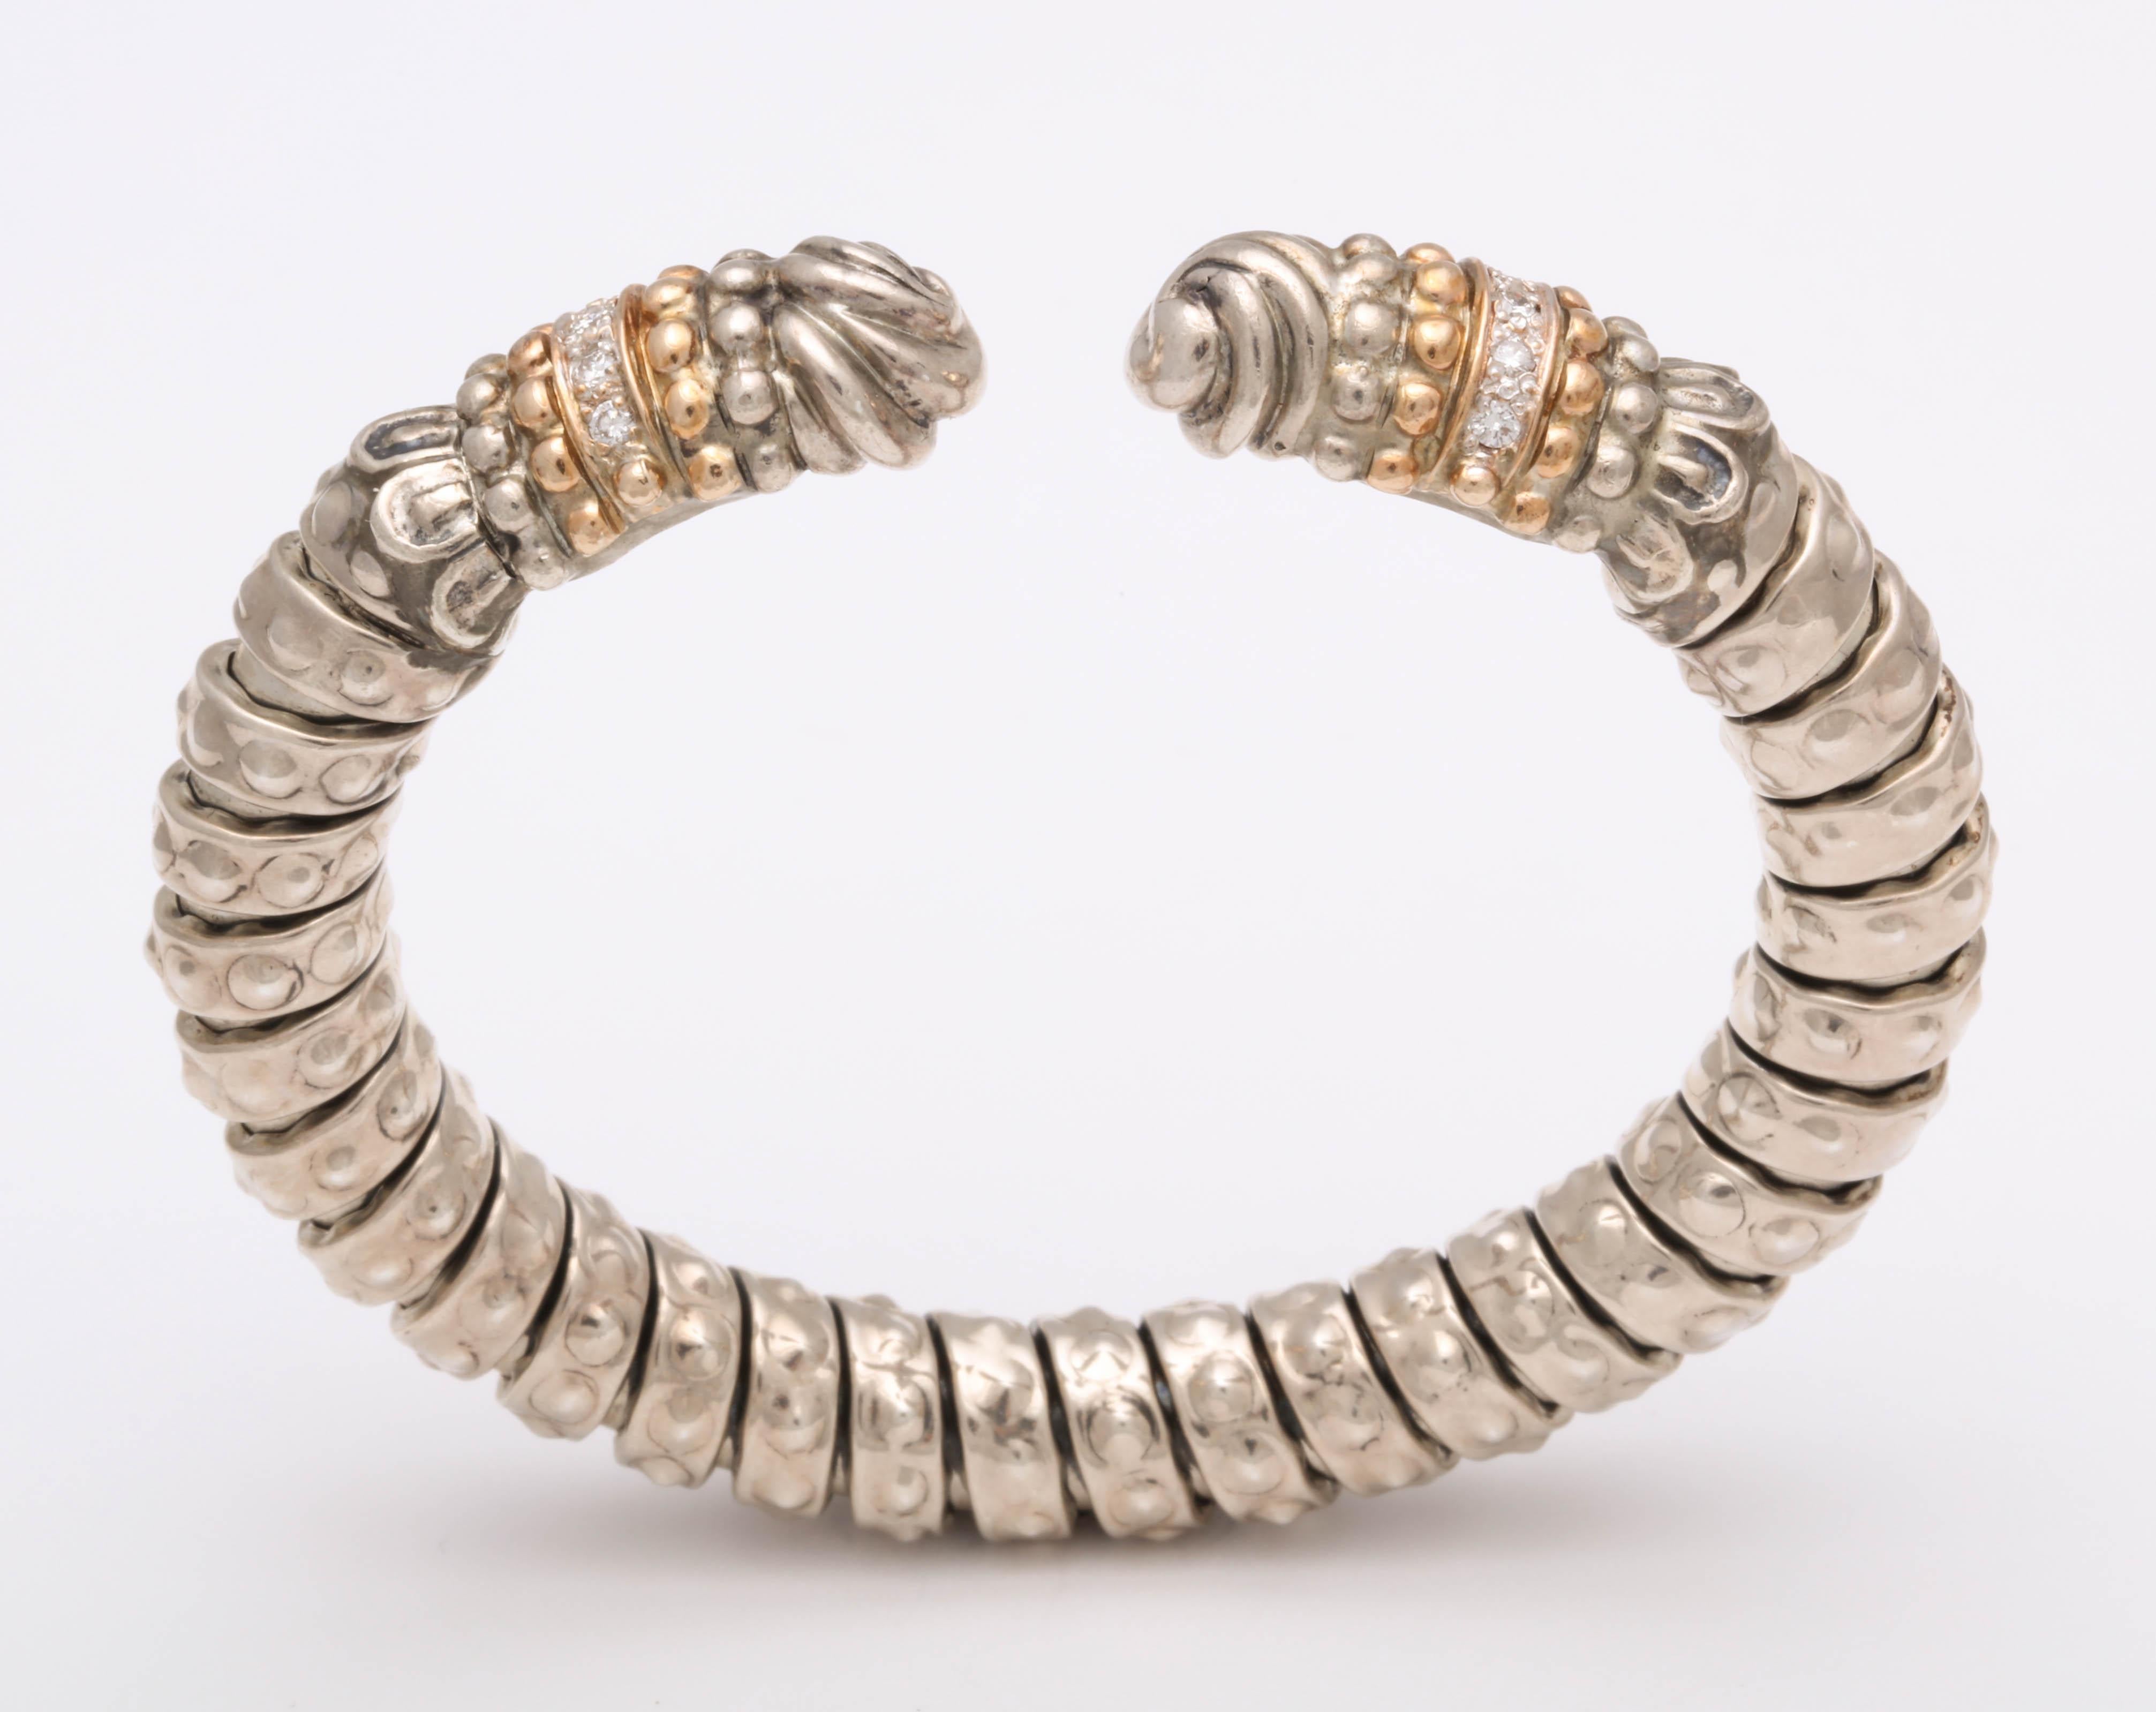 Luxurious Sterling Silver segmented Bangle with  three  14kt Yellow Gold Beaded Terminals - The two separated by  a single  row of full cut Diamonds on either side. of the Bangle.
Signed A Vahan 14kt & Sterling.  Lovely by itself or mixed with